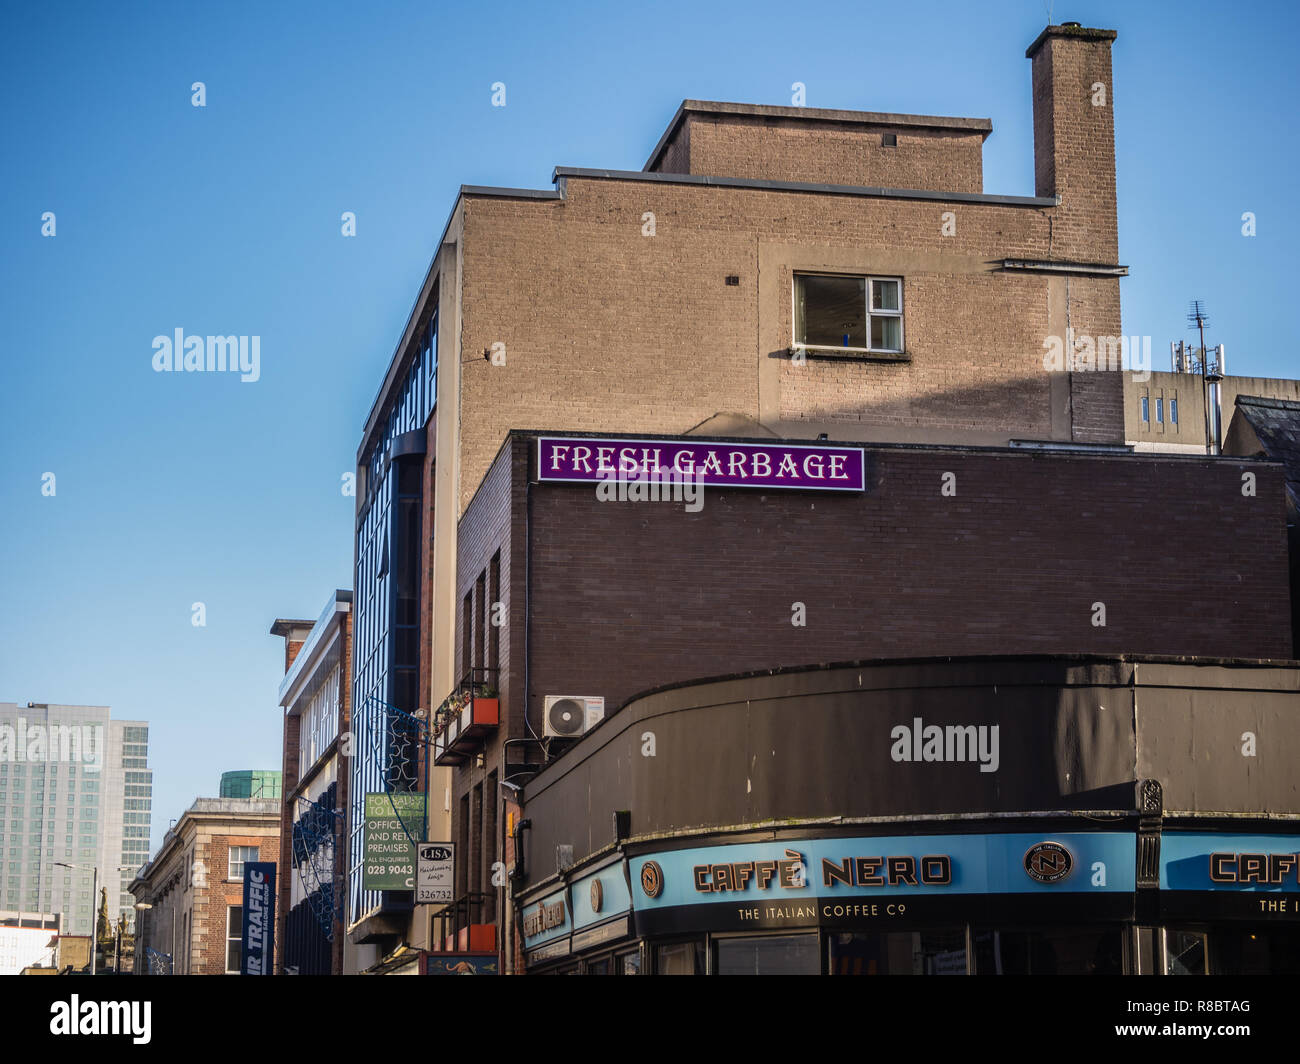 A retail sign showing Fresh Garbage on the streets of Belfast Stock Photo